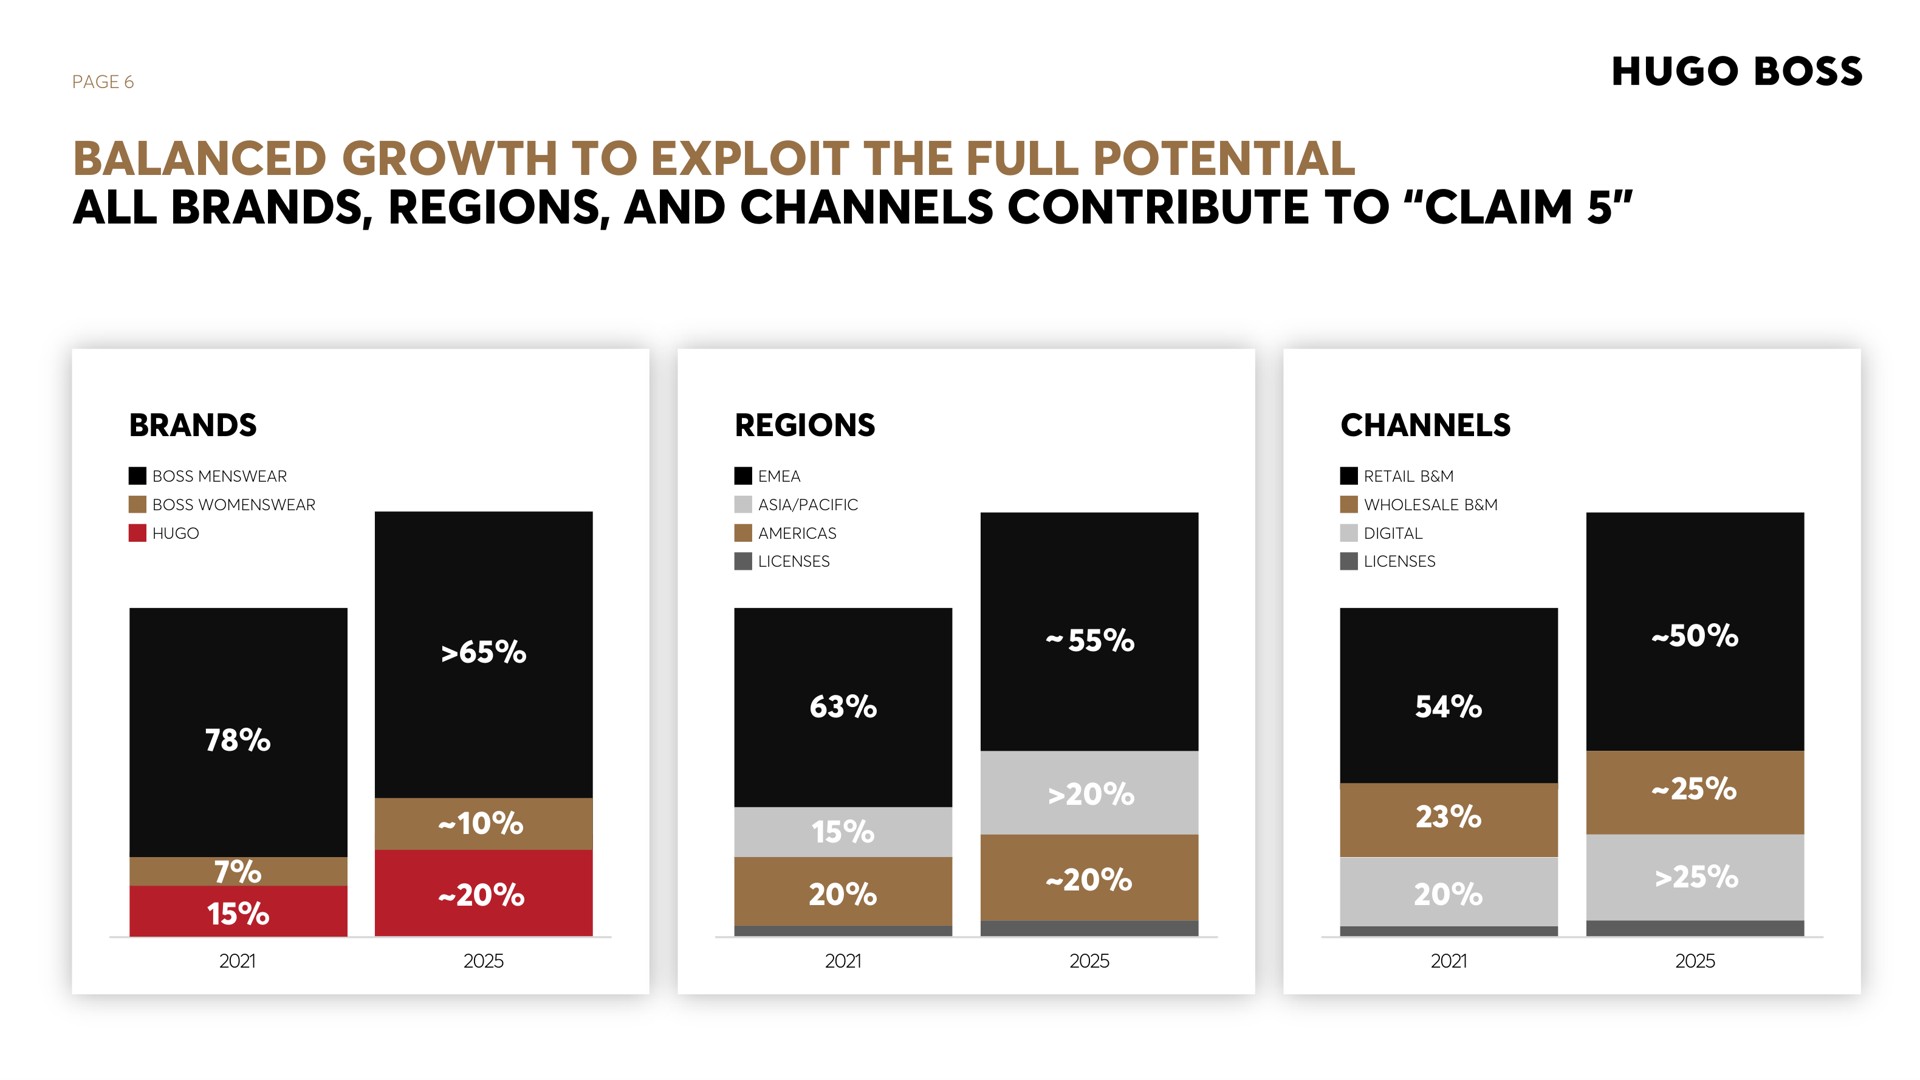 page balanced growth to exploit the full potential all brands regions and channels contribute to claim brands regions channels boss | Hugo Boss